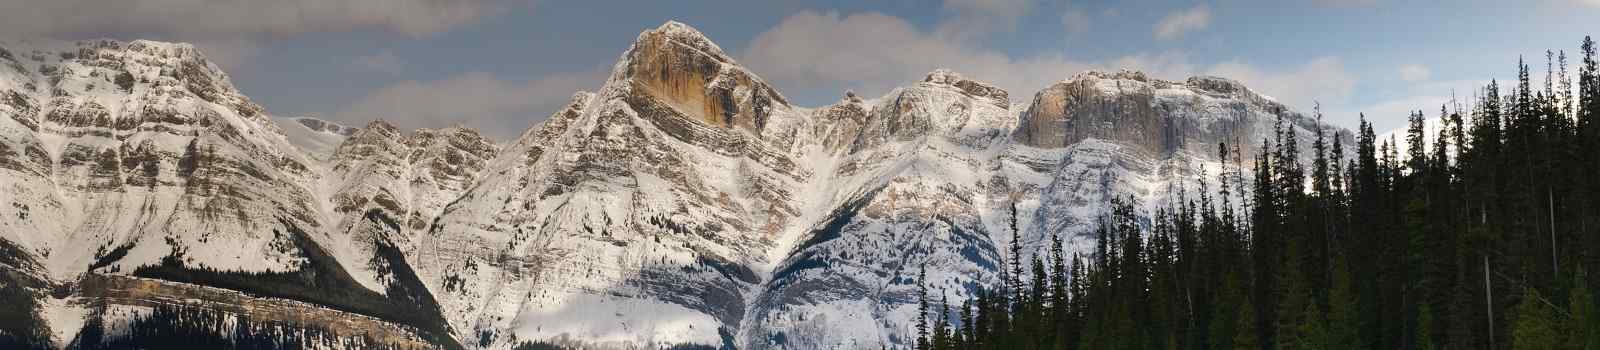 CAD-RM-JTC Kanada Alberta Mountain scenery along the Icefields Parkway  Banff and Jasper National Parks